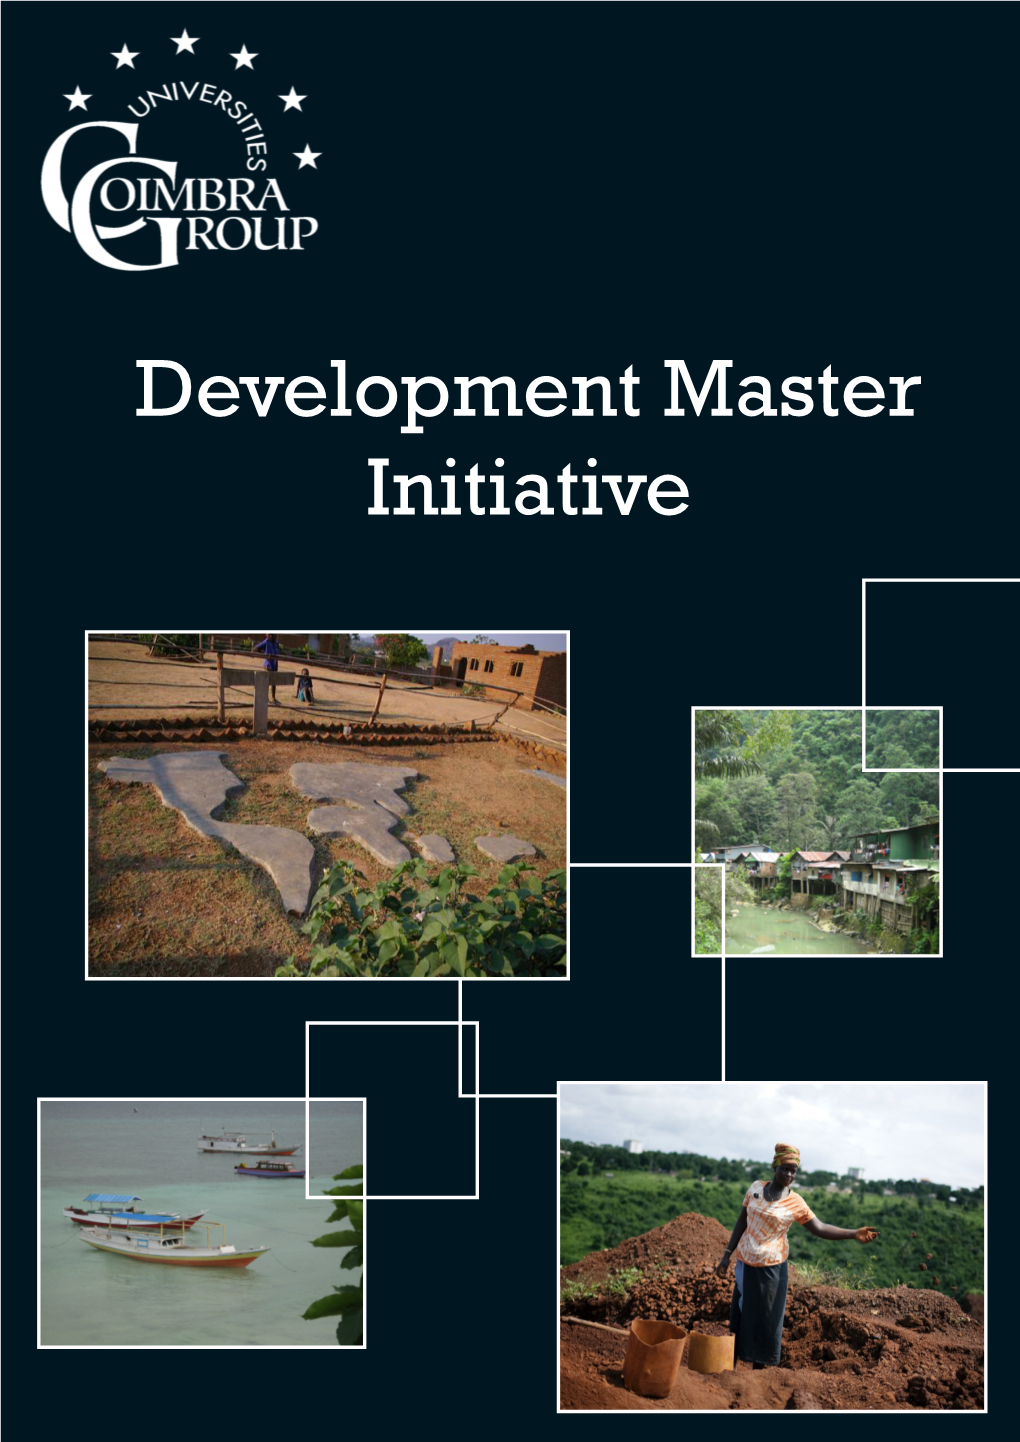 Development Master Initiative Welcome to the Coimbra Group Development Master Initiative (CGDMI)